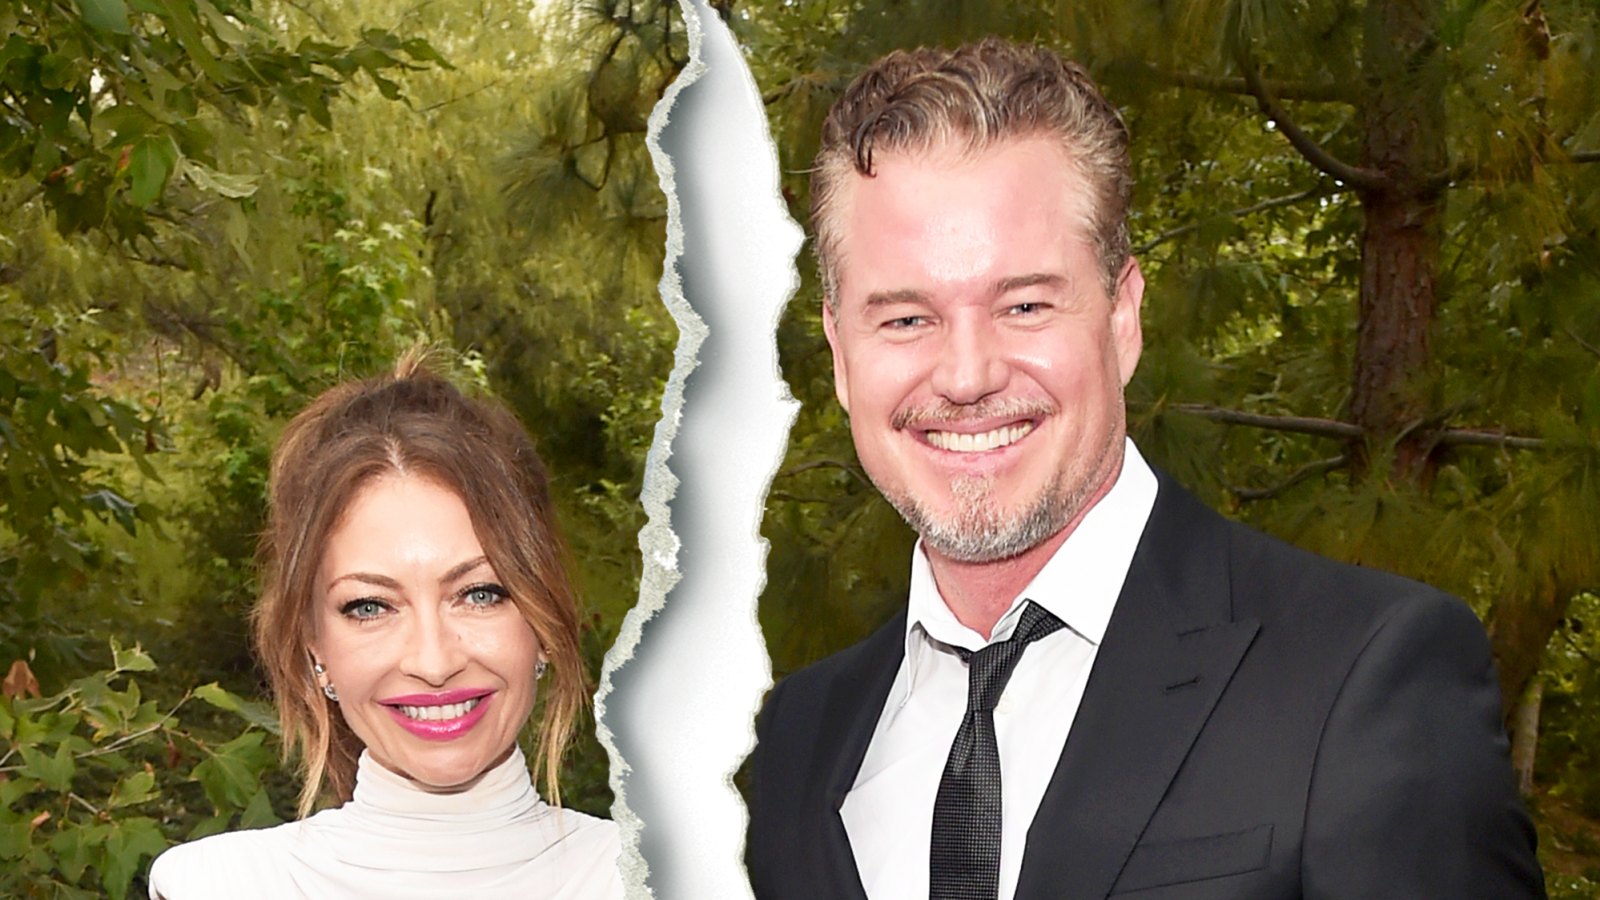 Rebecca Gayheart and Eric Dane attend the 16th Annual Chrysalis Butterfly Ball on June 3, 2017 in Los Angeles, California.